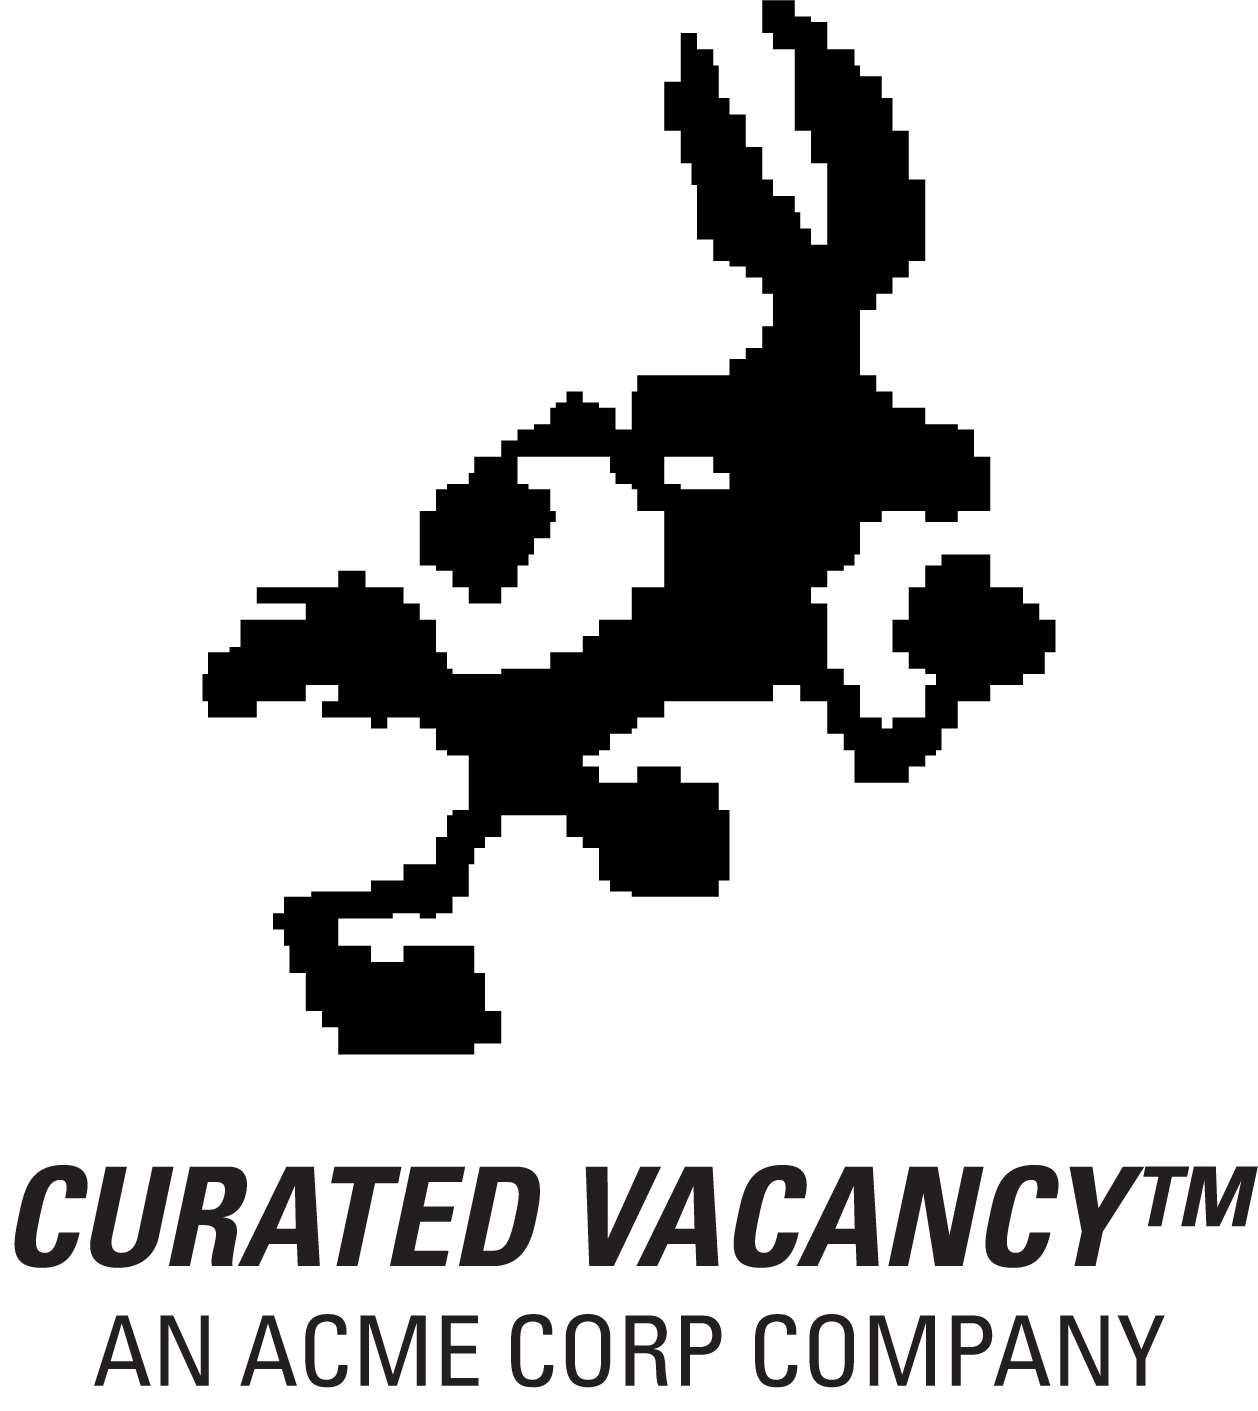 “Curated Vacancy” — An ACME Corp. Company